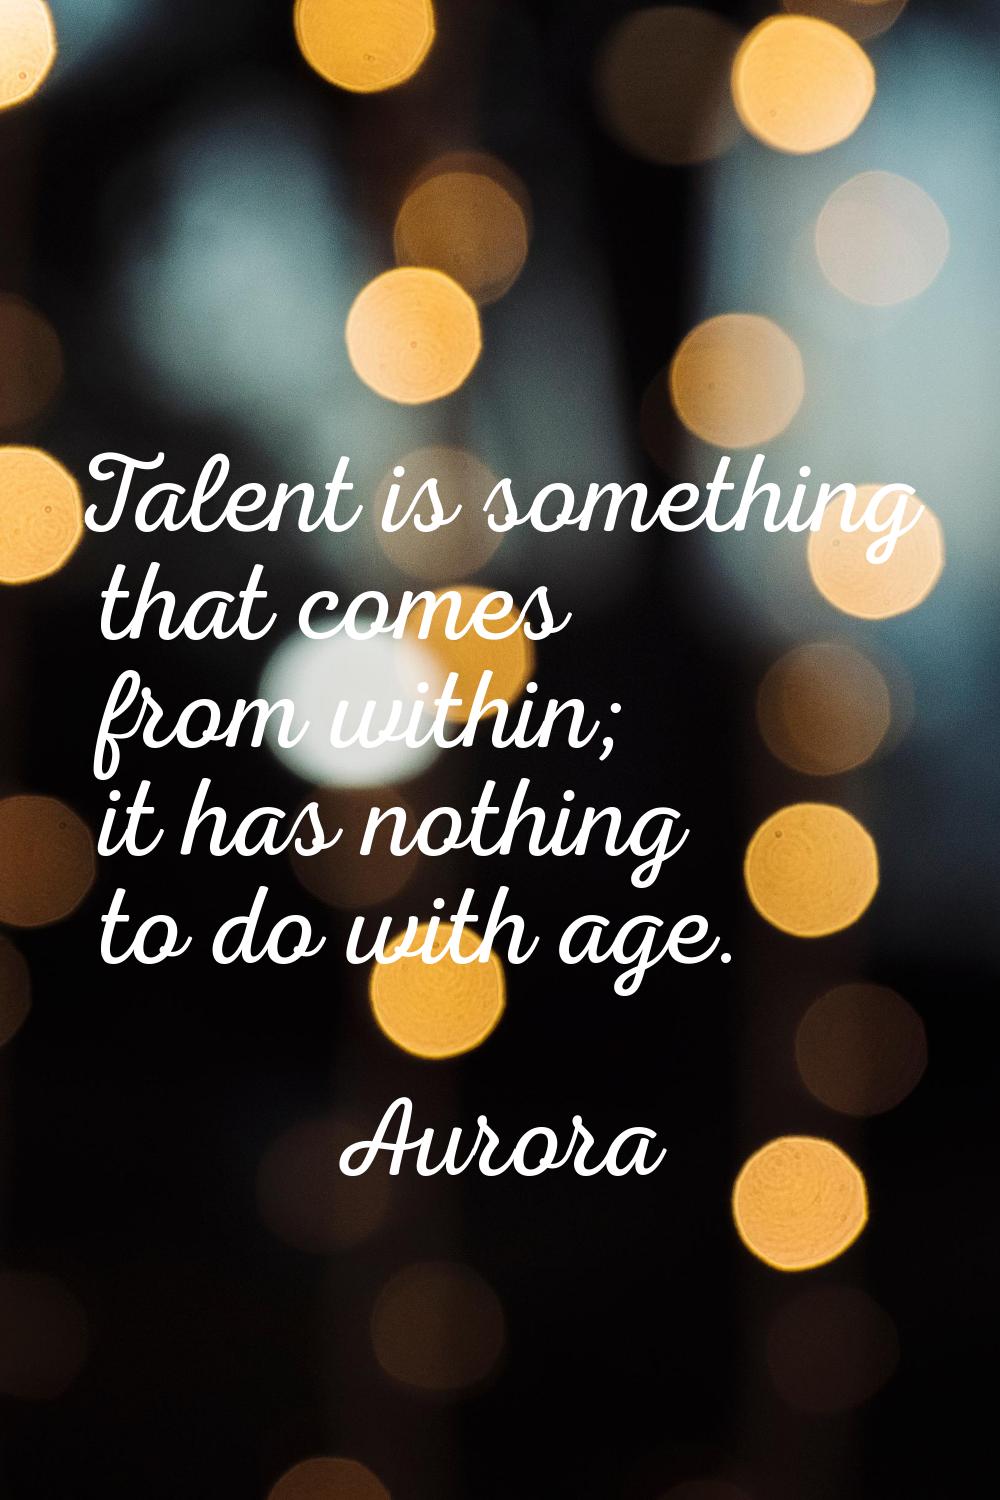 Talent is something that comes from within; it has nothing to do with age.